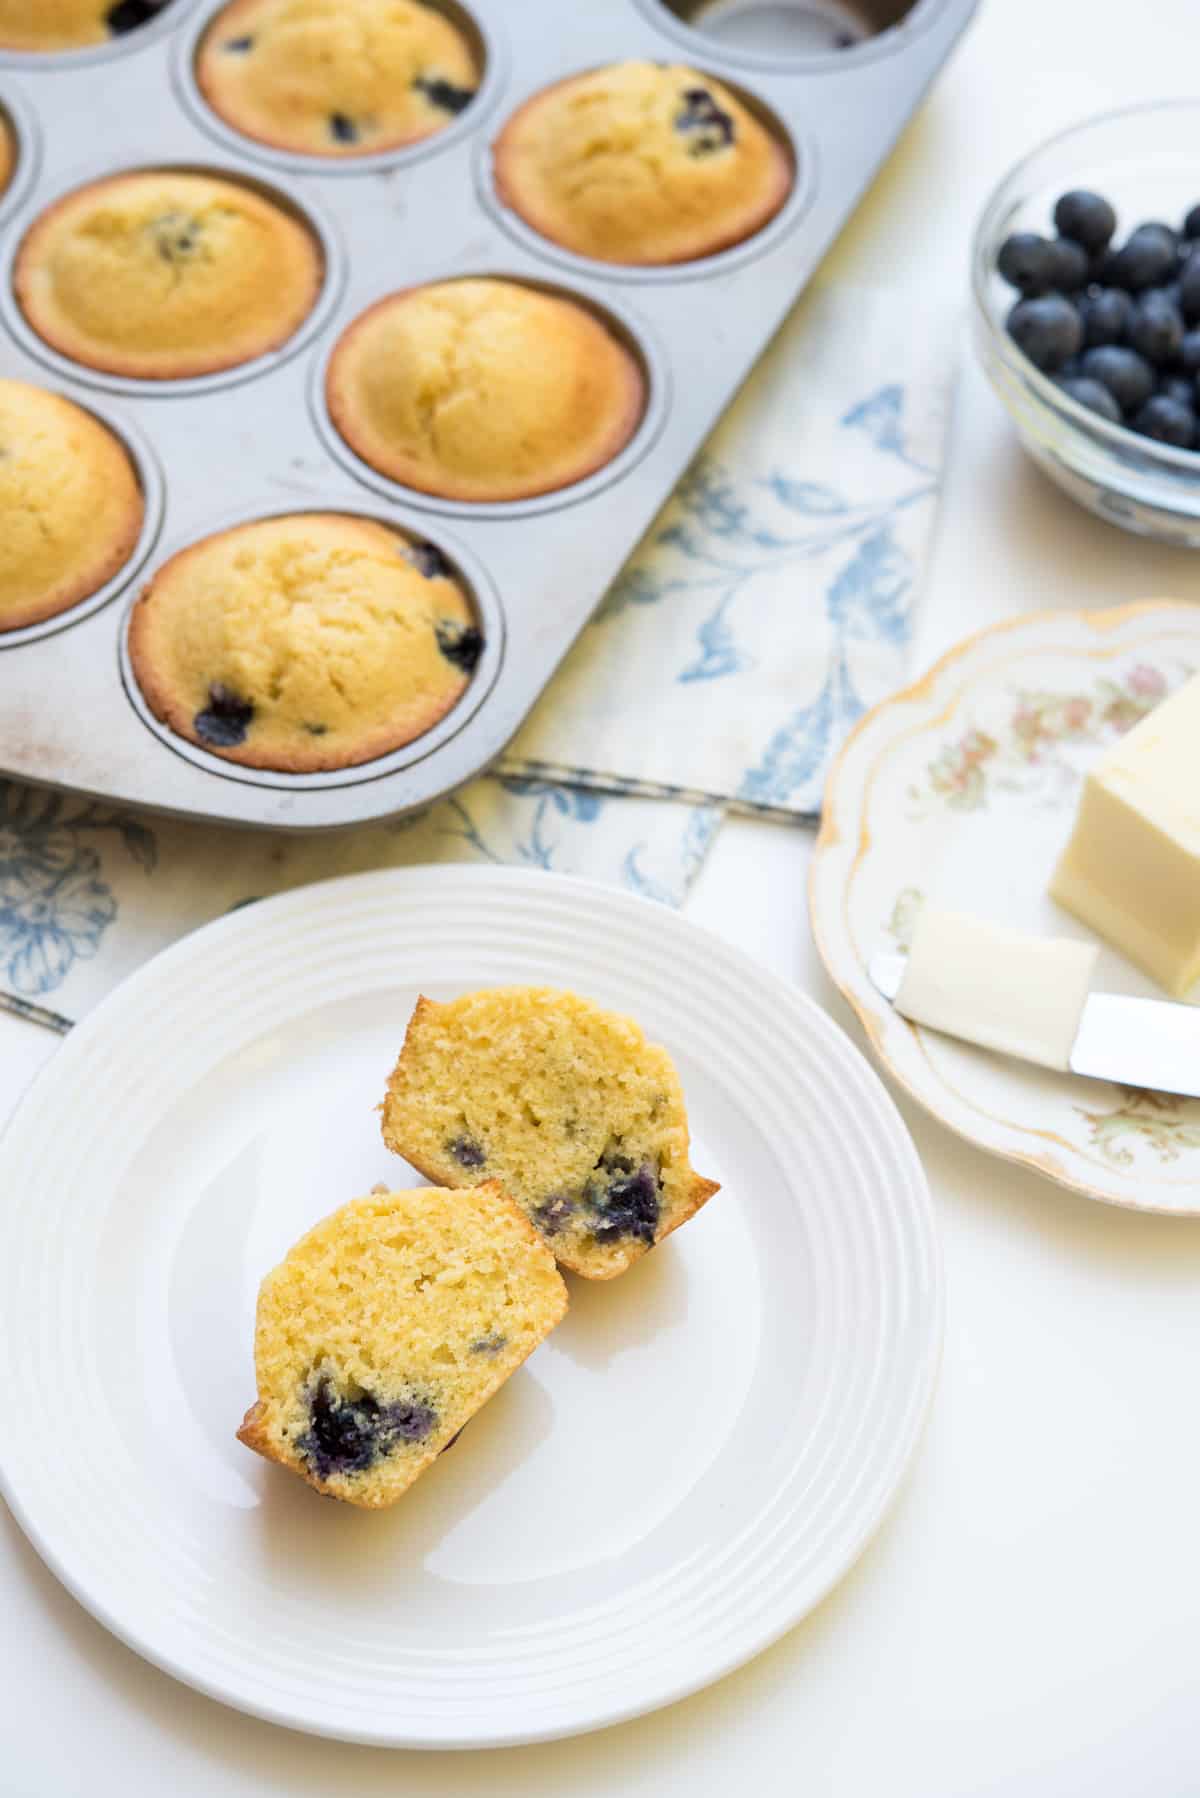 A blueberry cornmeal muffin sliced in half on a white plate next to a small plate with butter and a knife.